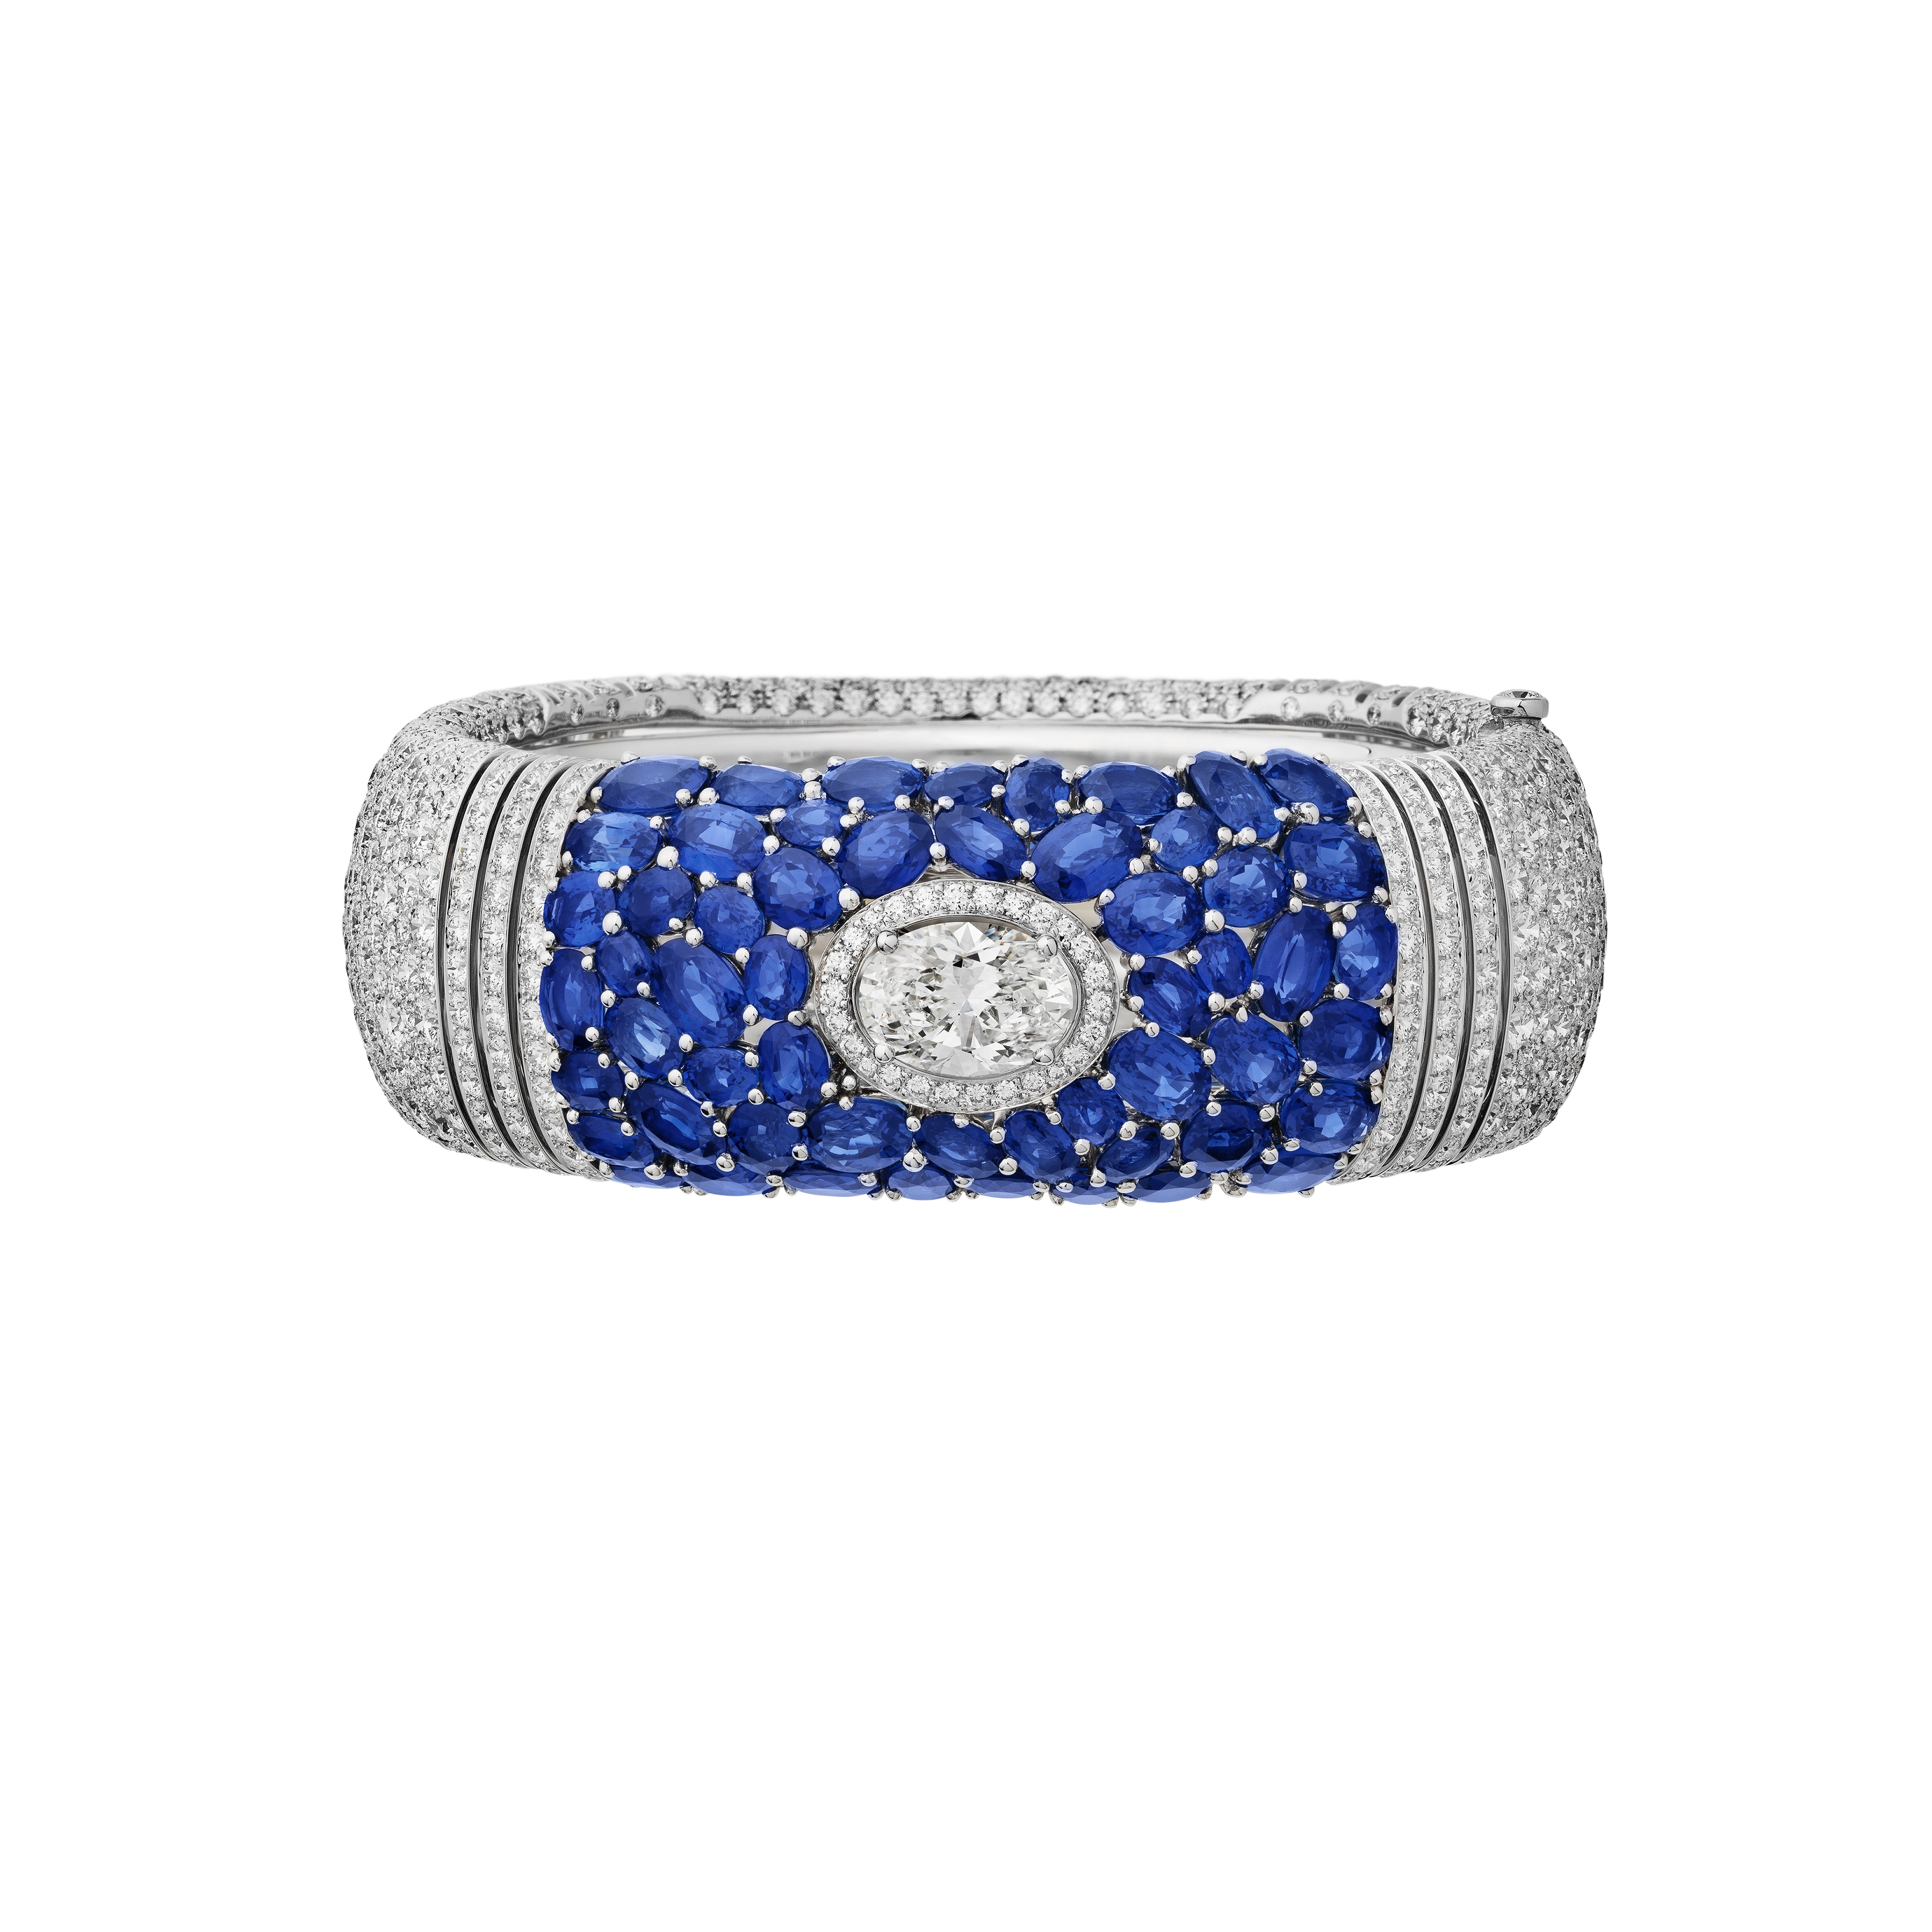 Flyng Cloud: the new Chanel Haute Joaillerie - ZOE Magazine